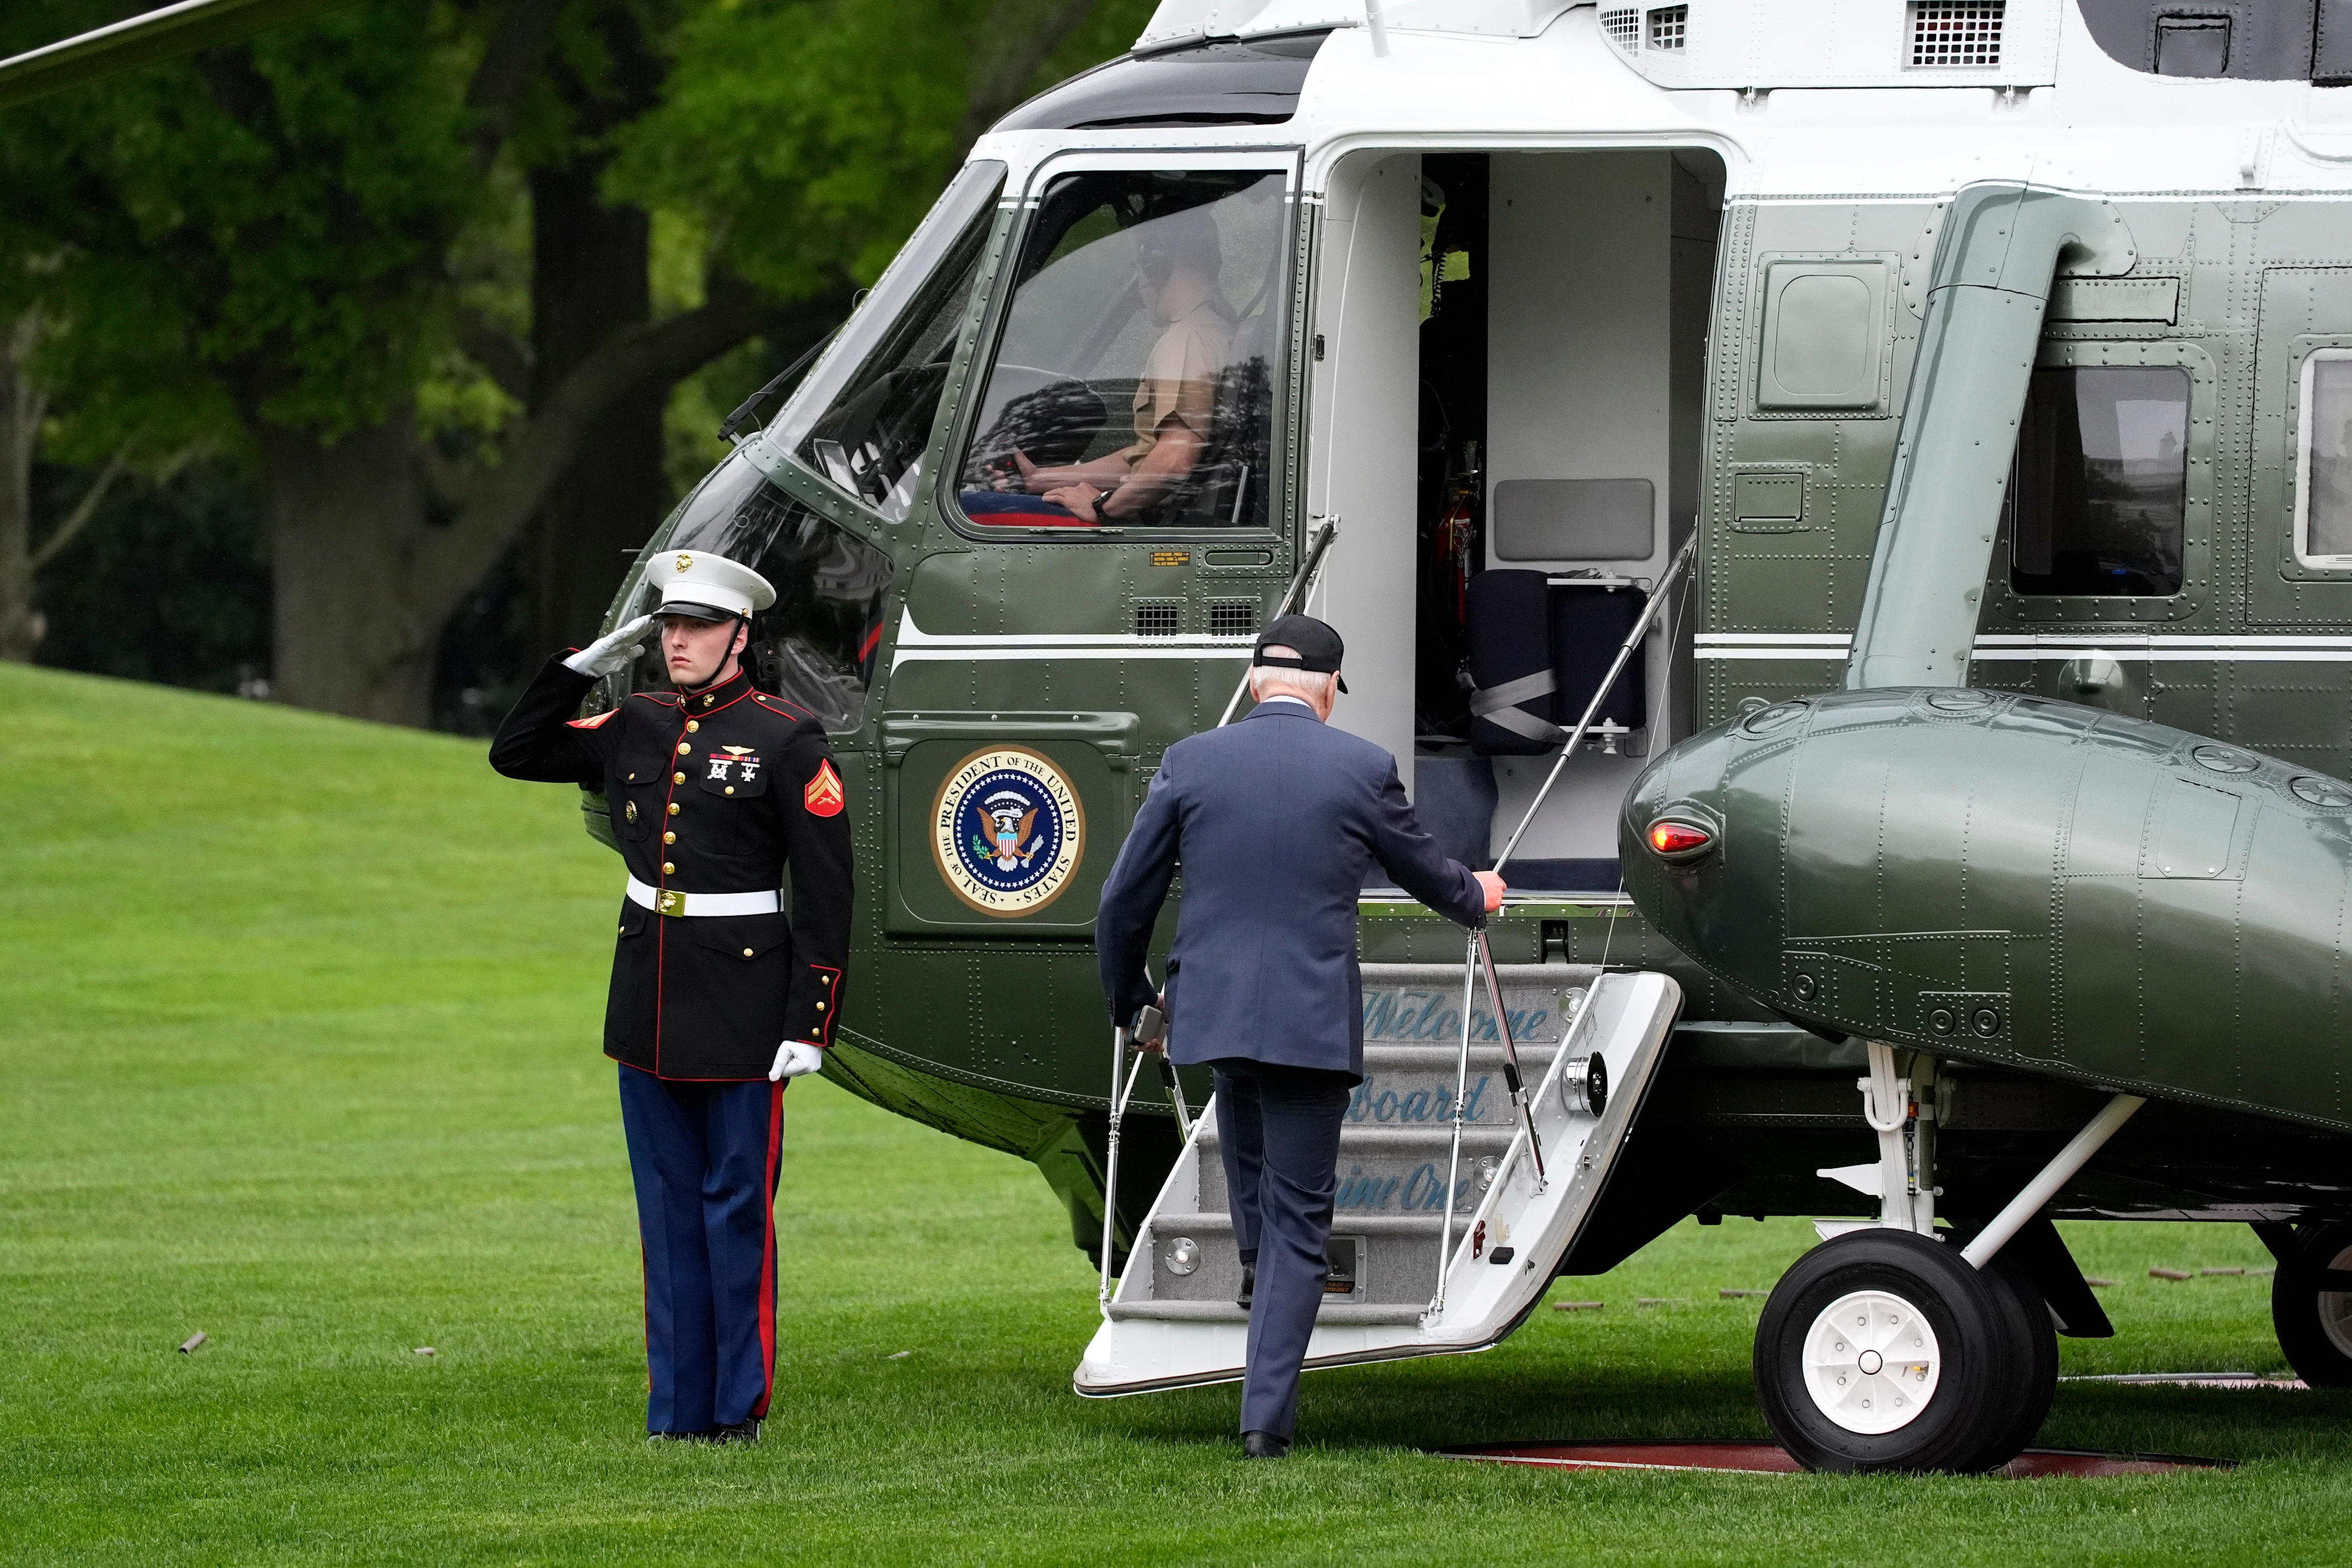 microsoft, new marine one helicopters the us spent $5 billion on aren't allowed to carry the president because they could scorch the lawn